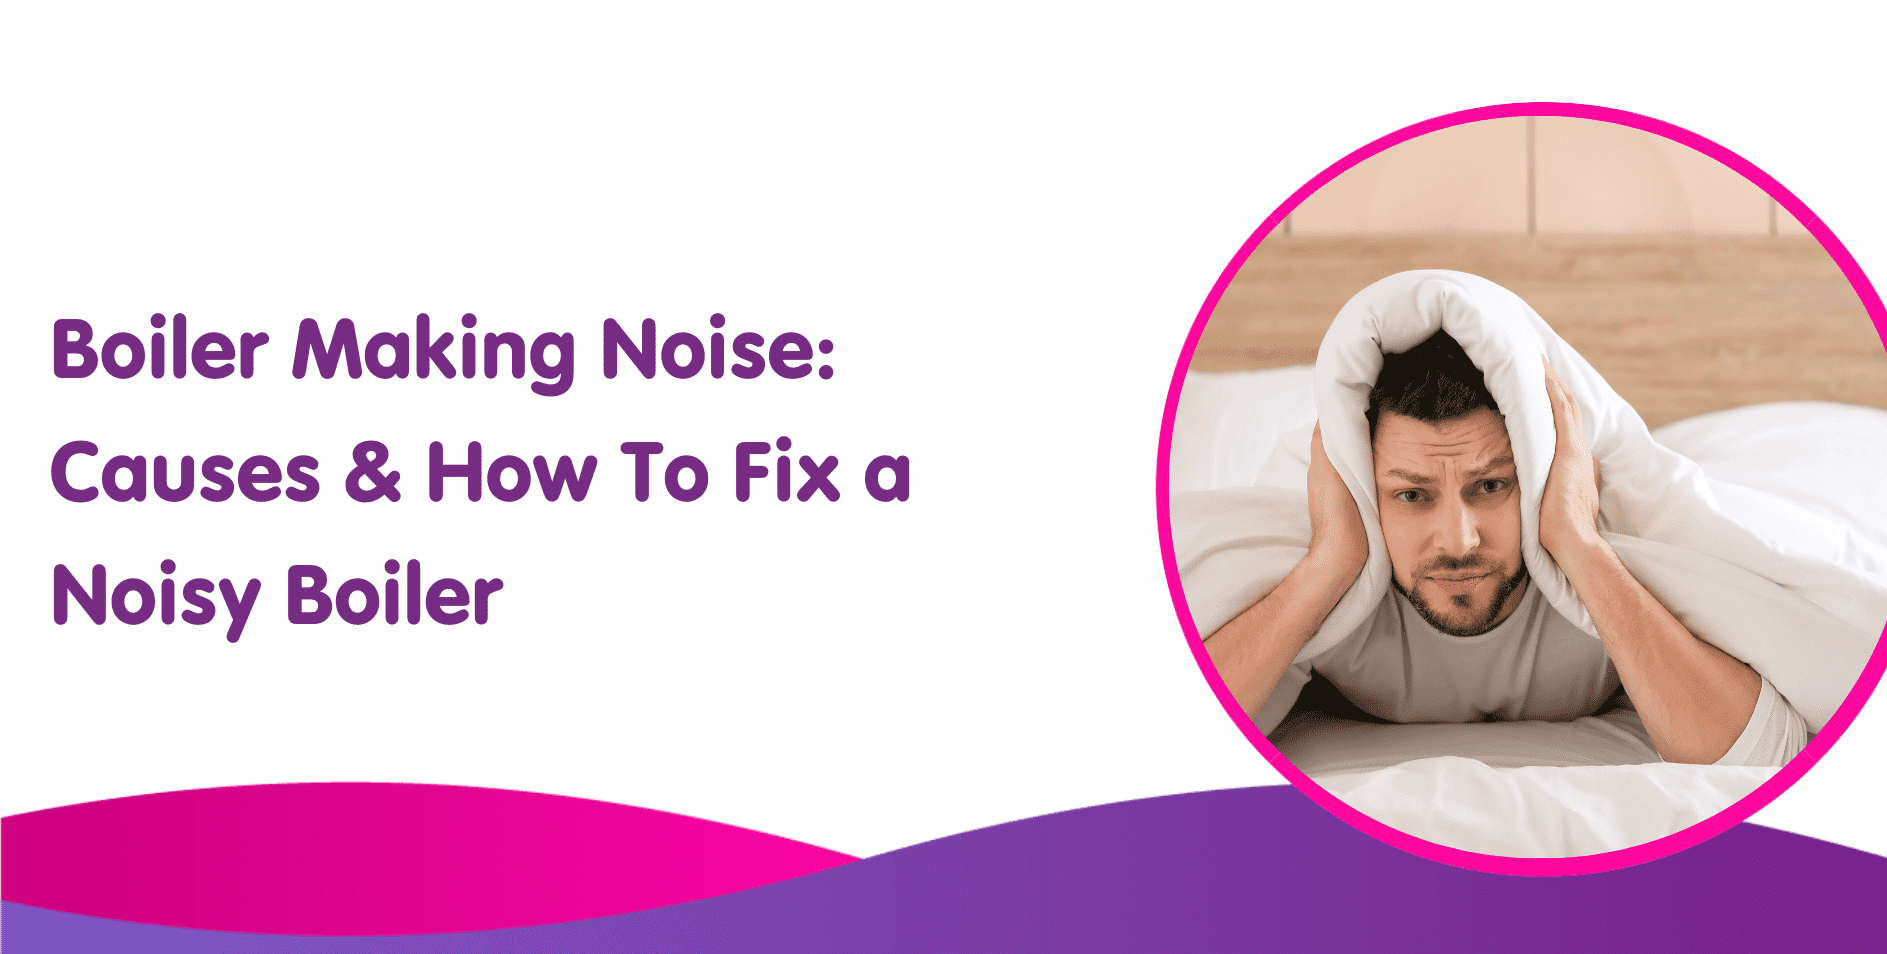 Boiler Making Noise: Causes & How To Fix a Noisy Boiler